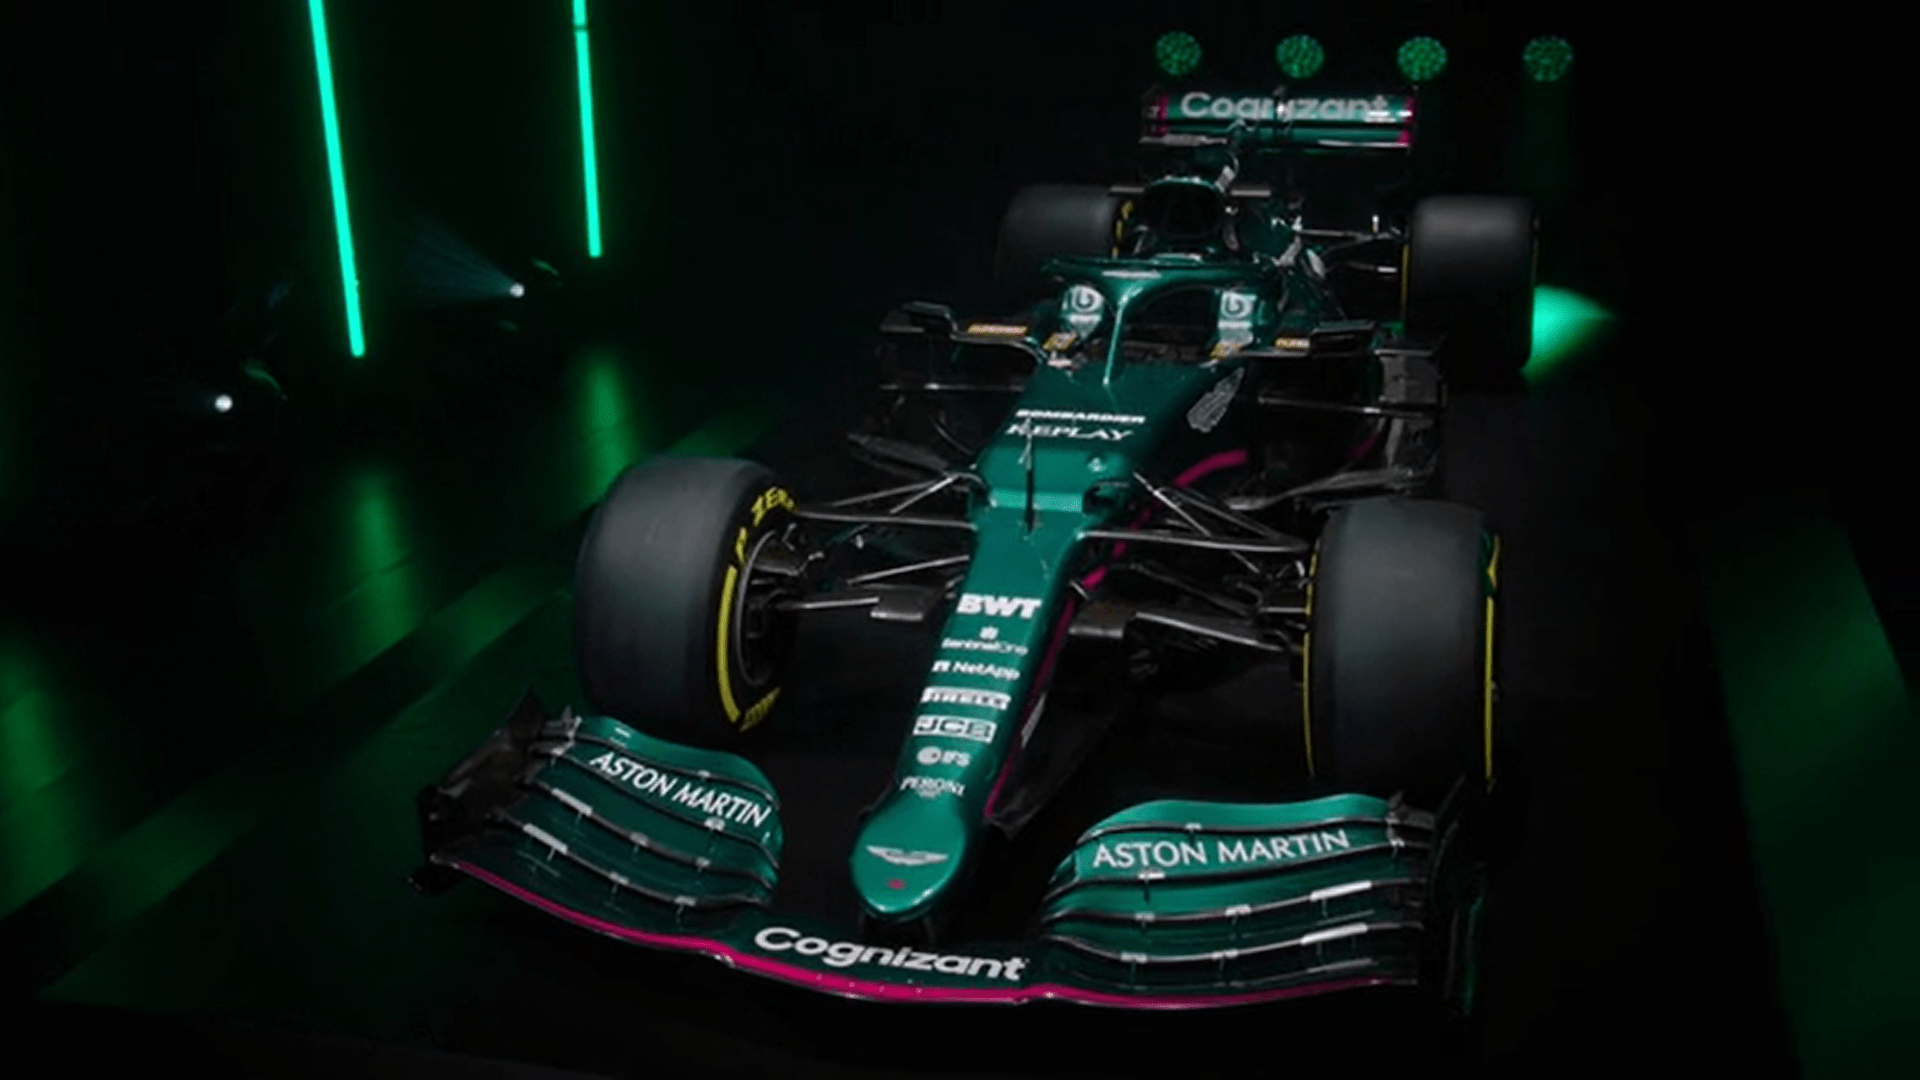 From being hacked to early leakages, ranking the 2021 F1 car launches from best to worst